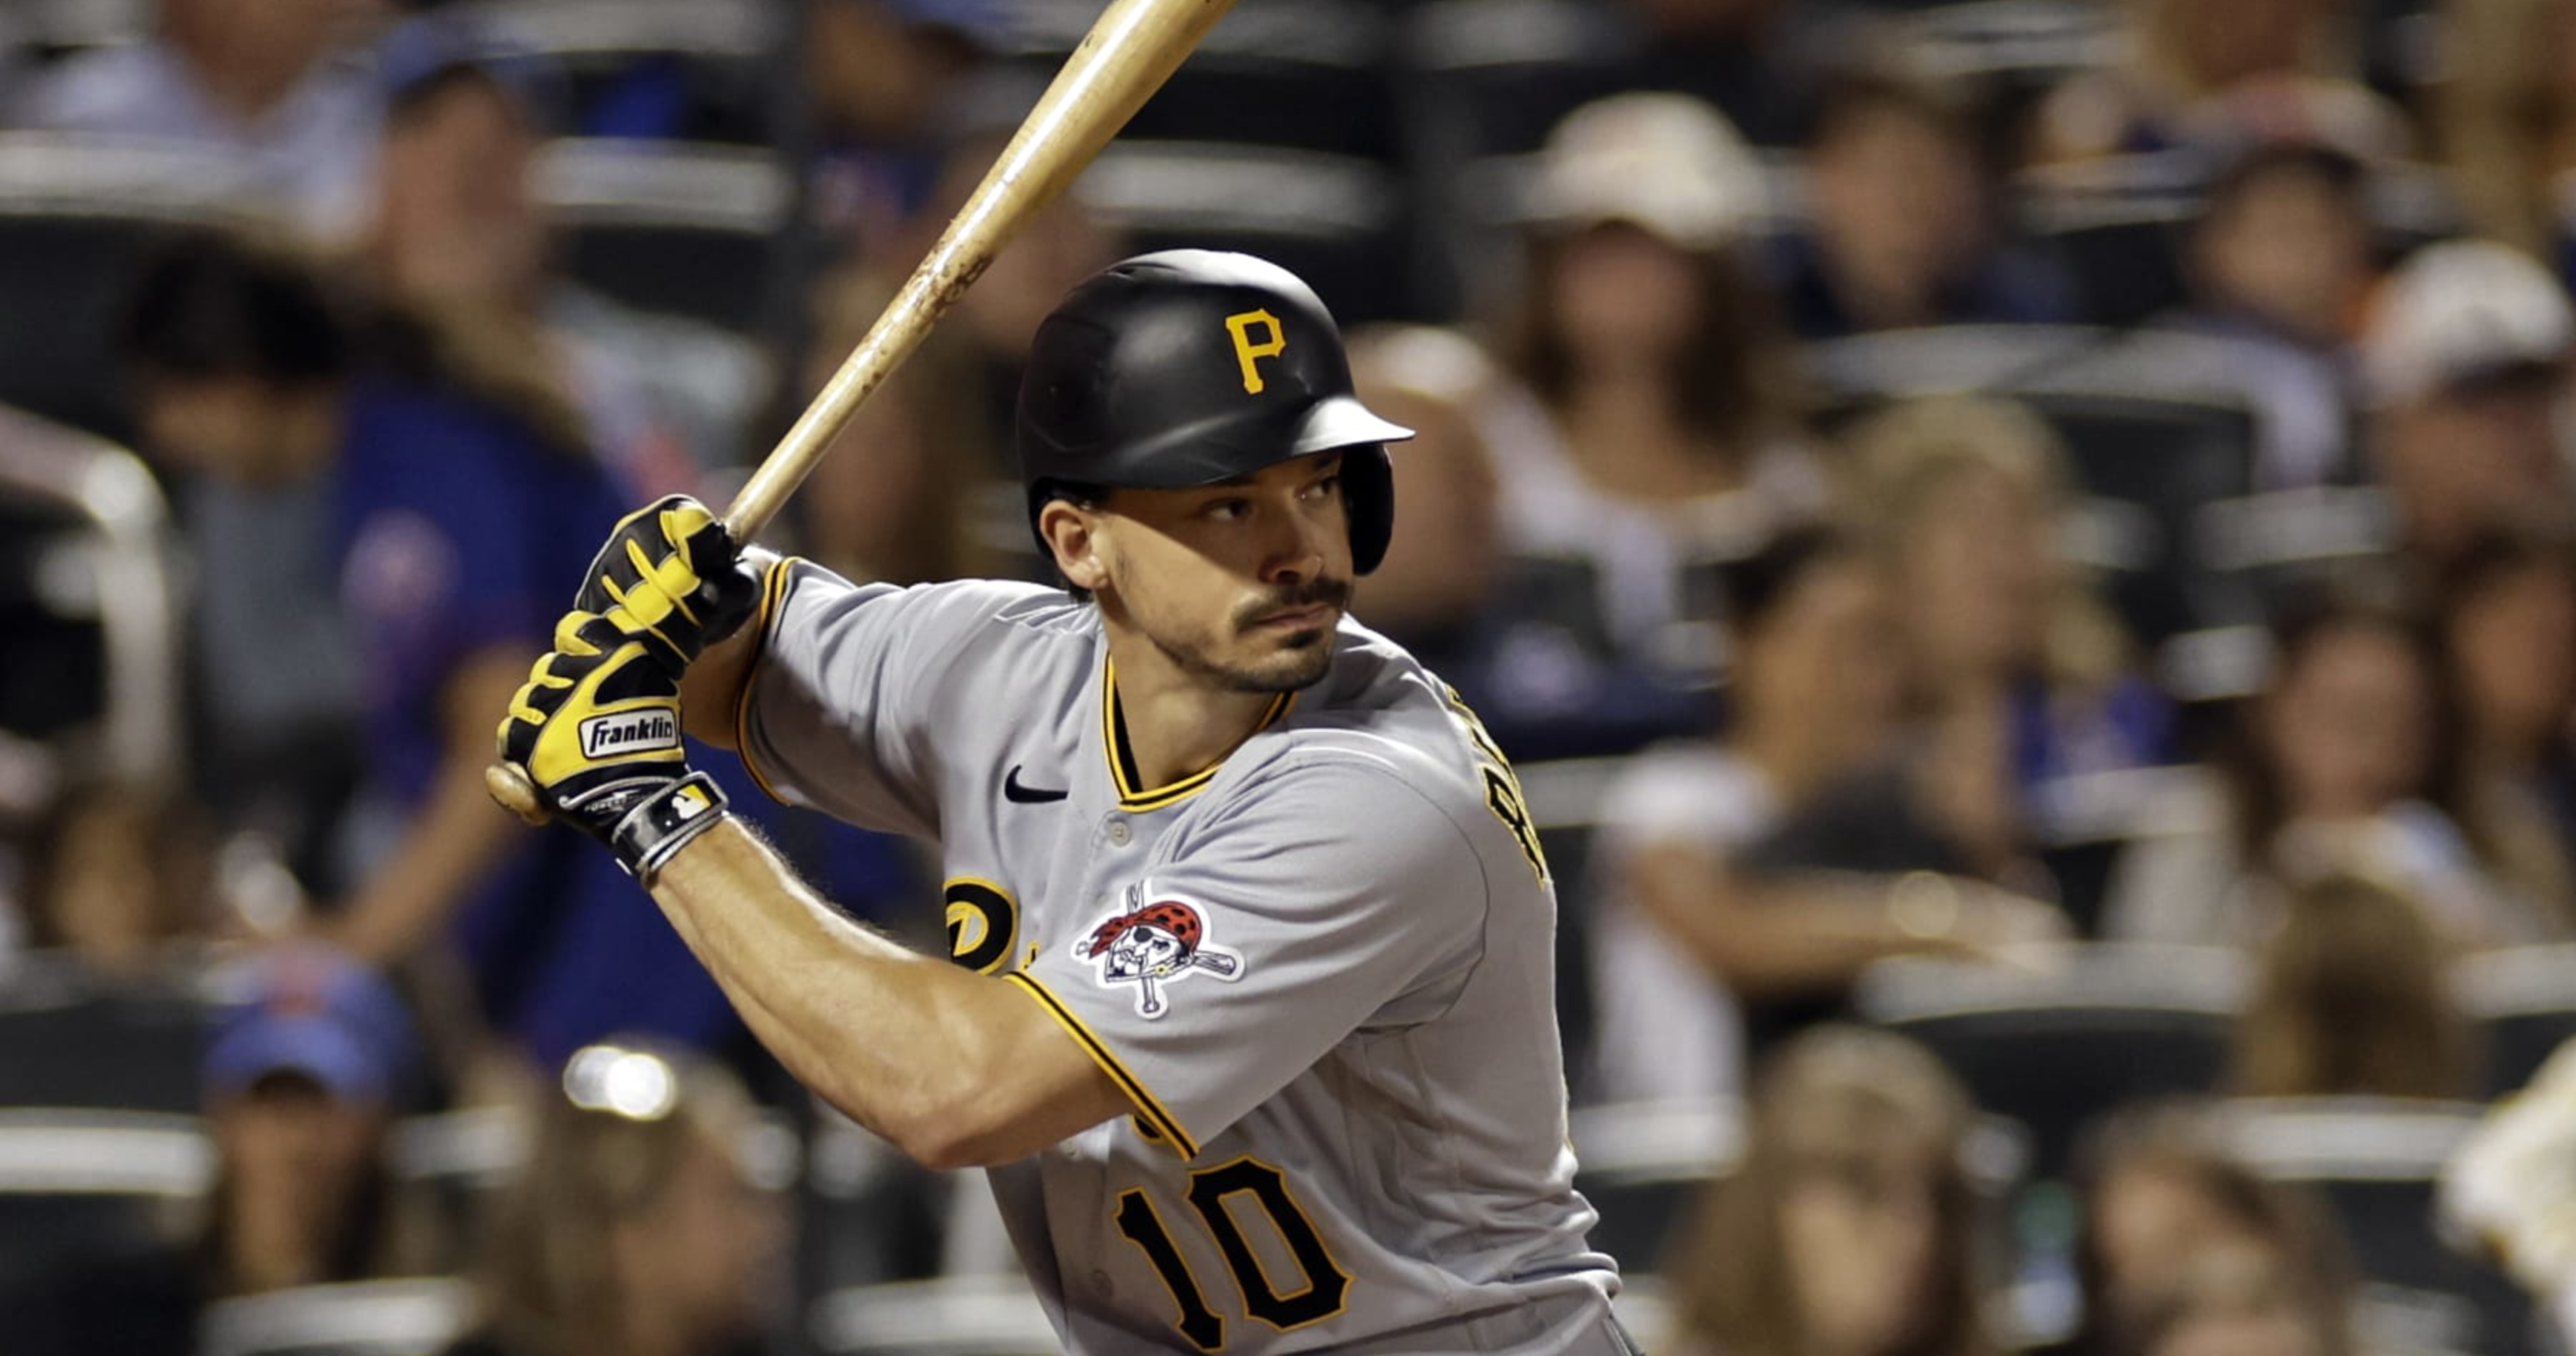 MLB Rumors: Bryan Reynolds Requests Trade from Pirates; Contract Talks at 'Impas..